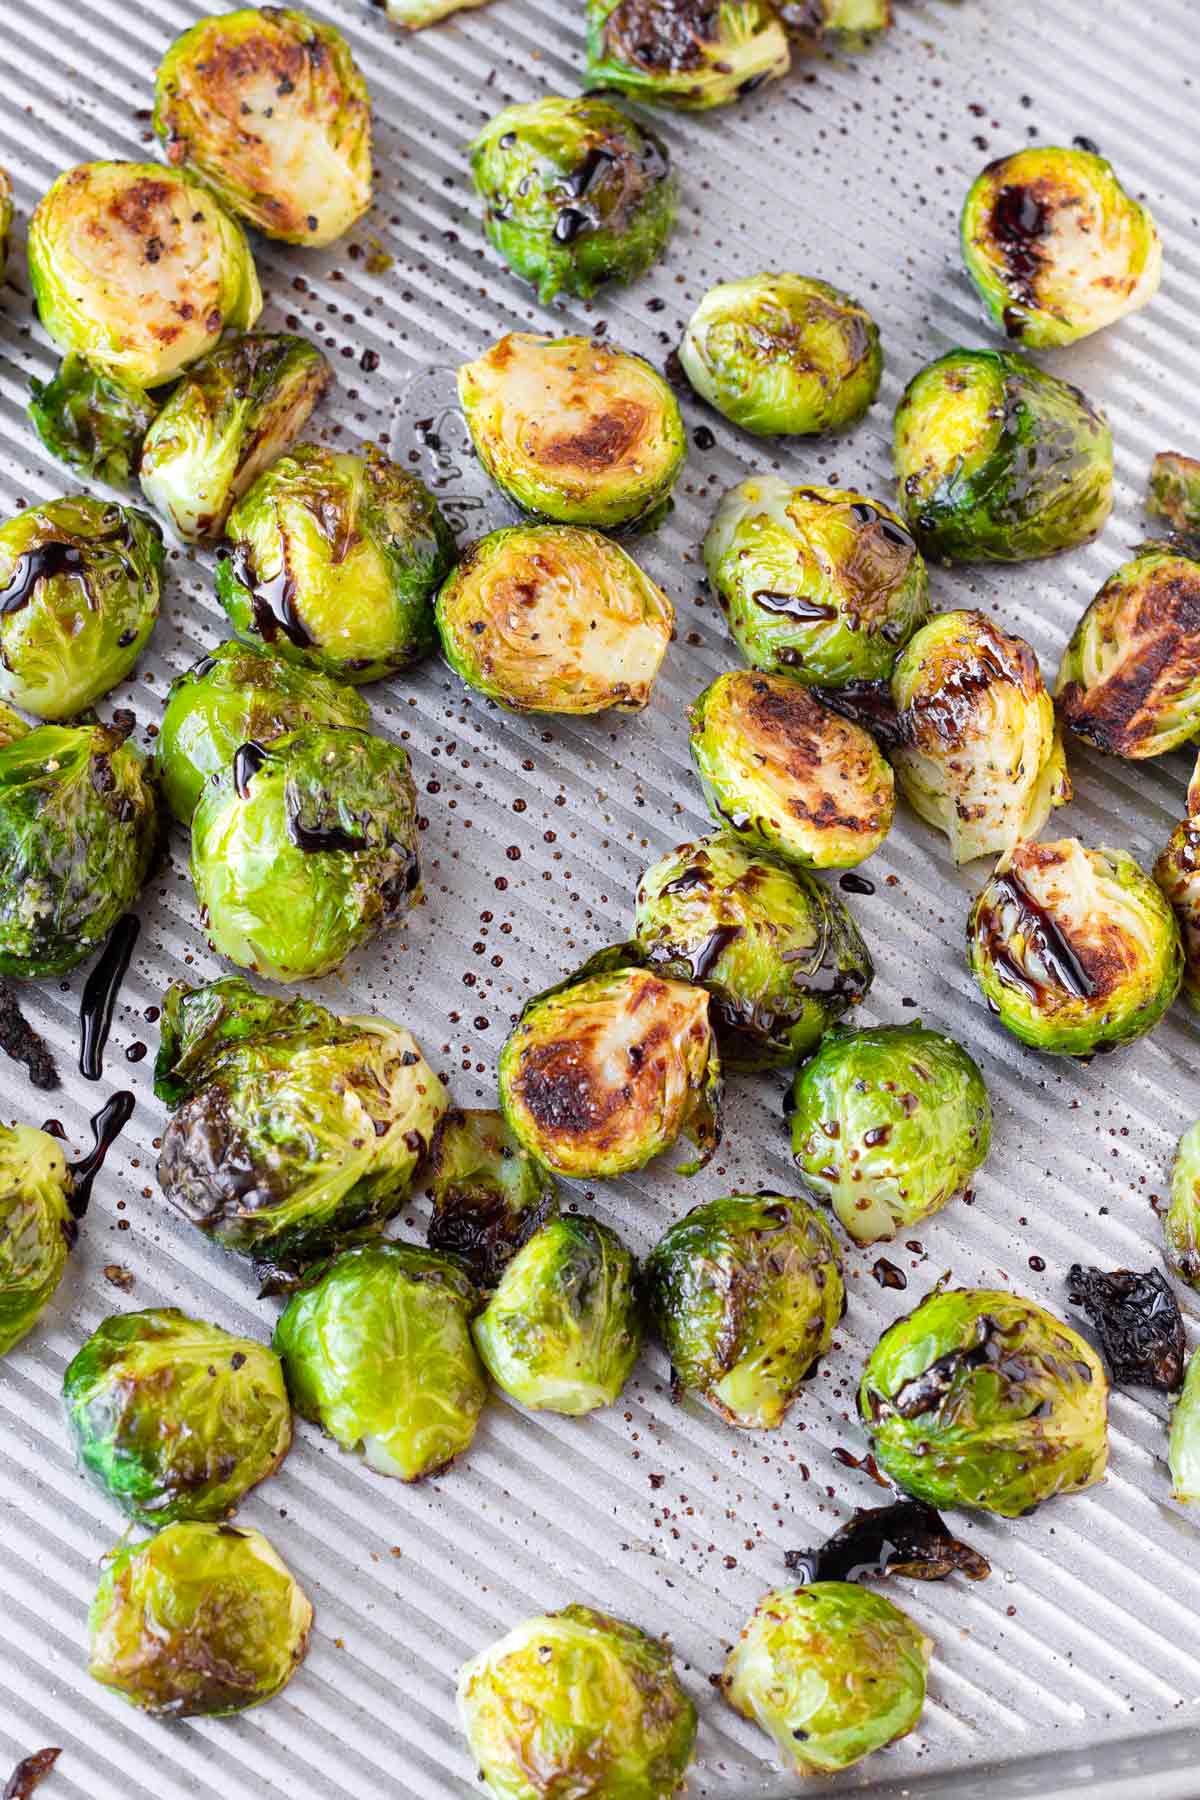 brussels sprouts tossed with thick balsamic glaze on sheet pan